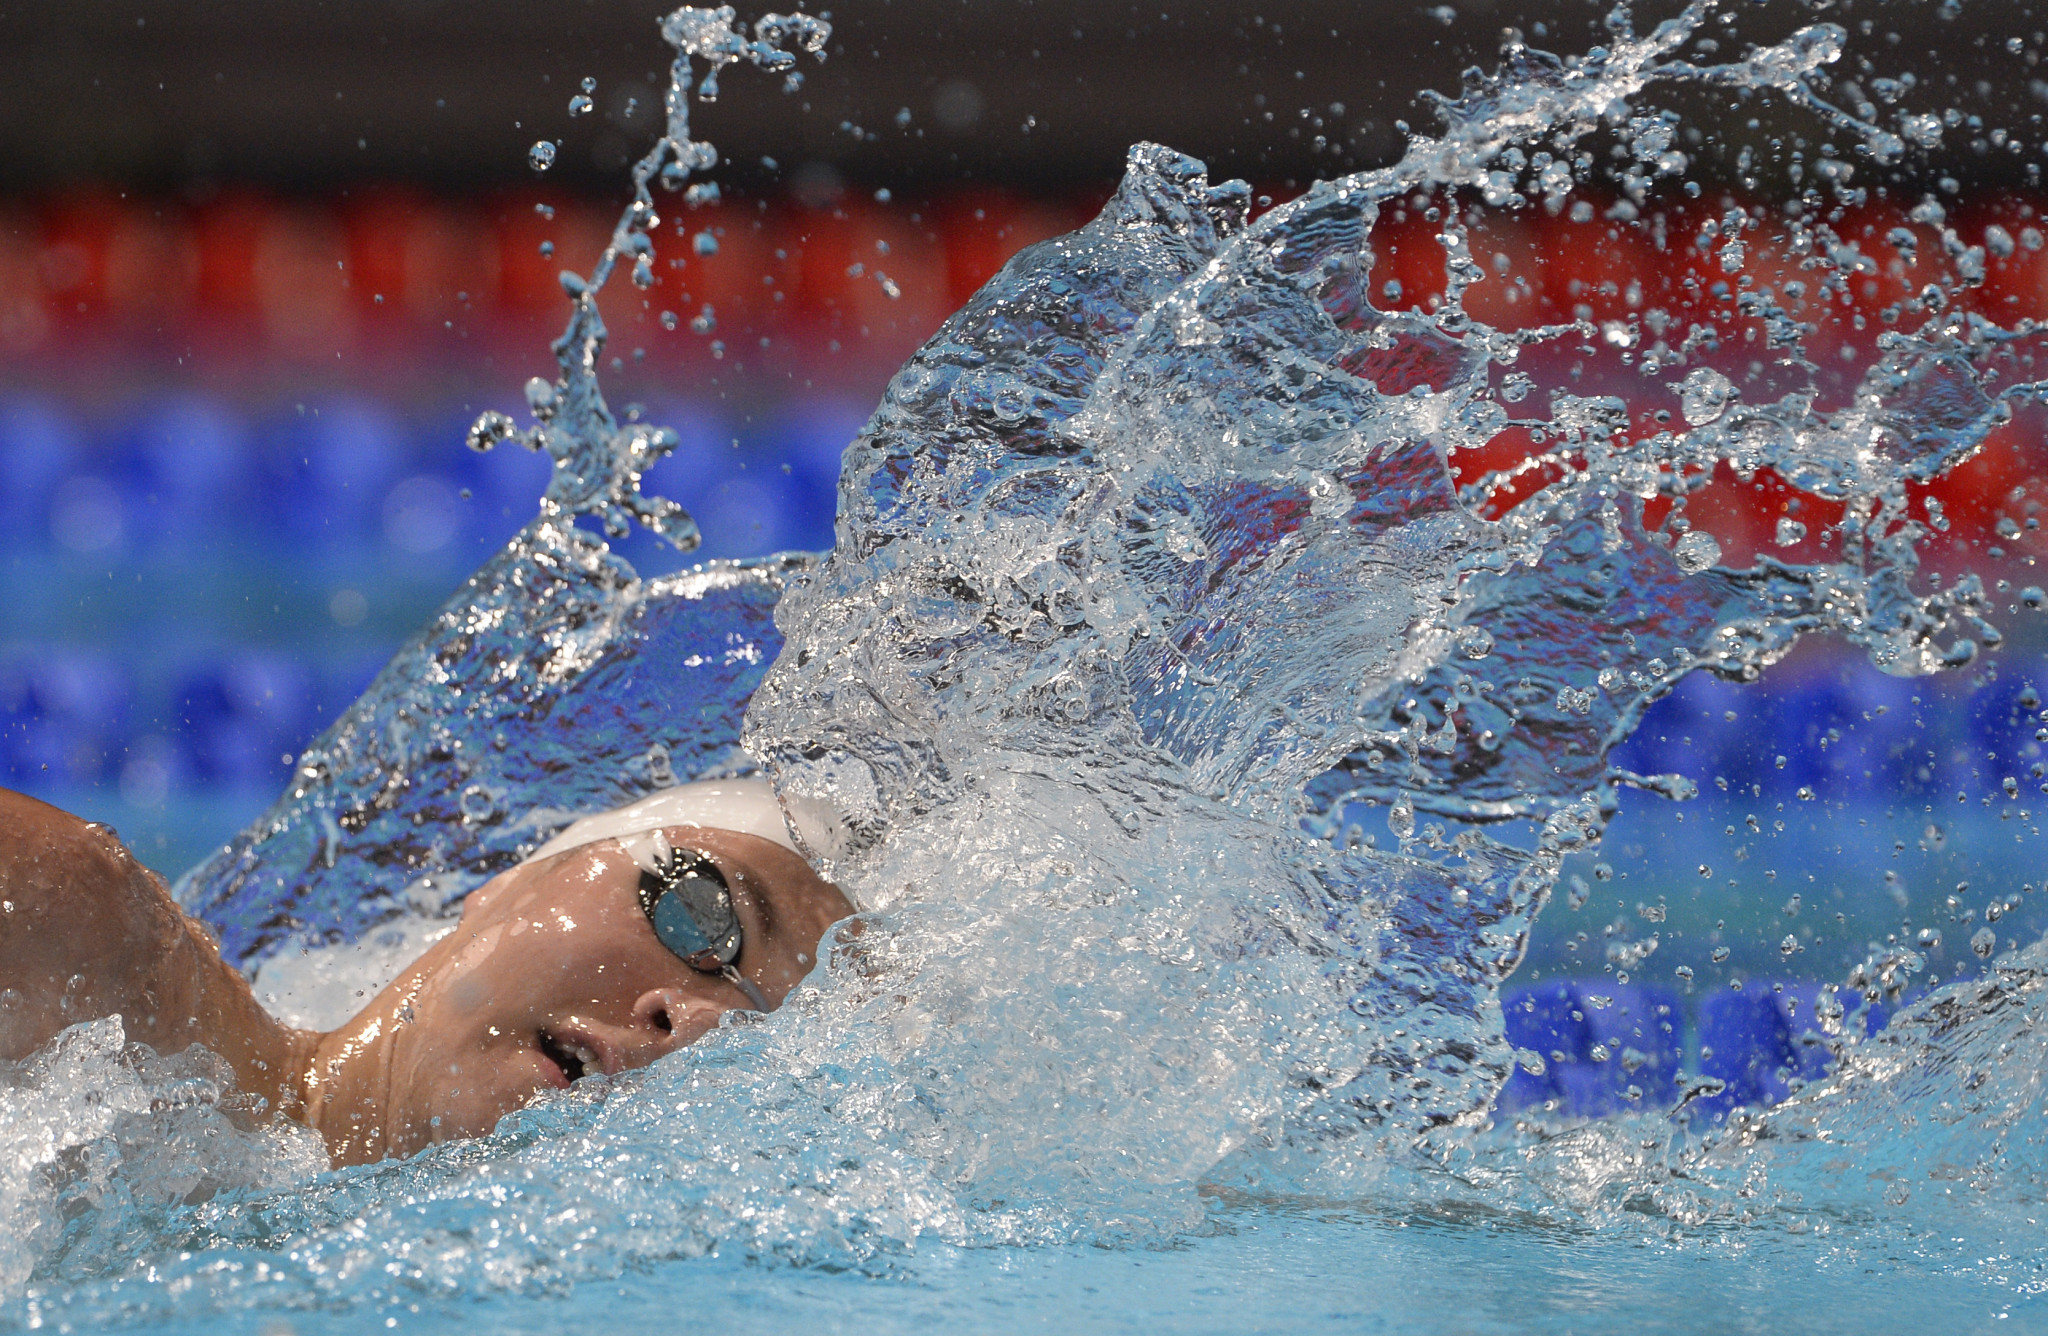 Artem Lobuzov represented Russia at the London 2012 Olympic Games ©Getty Images